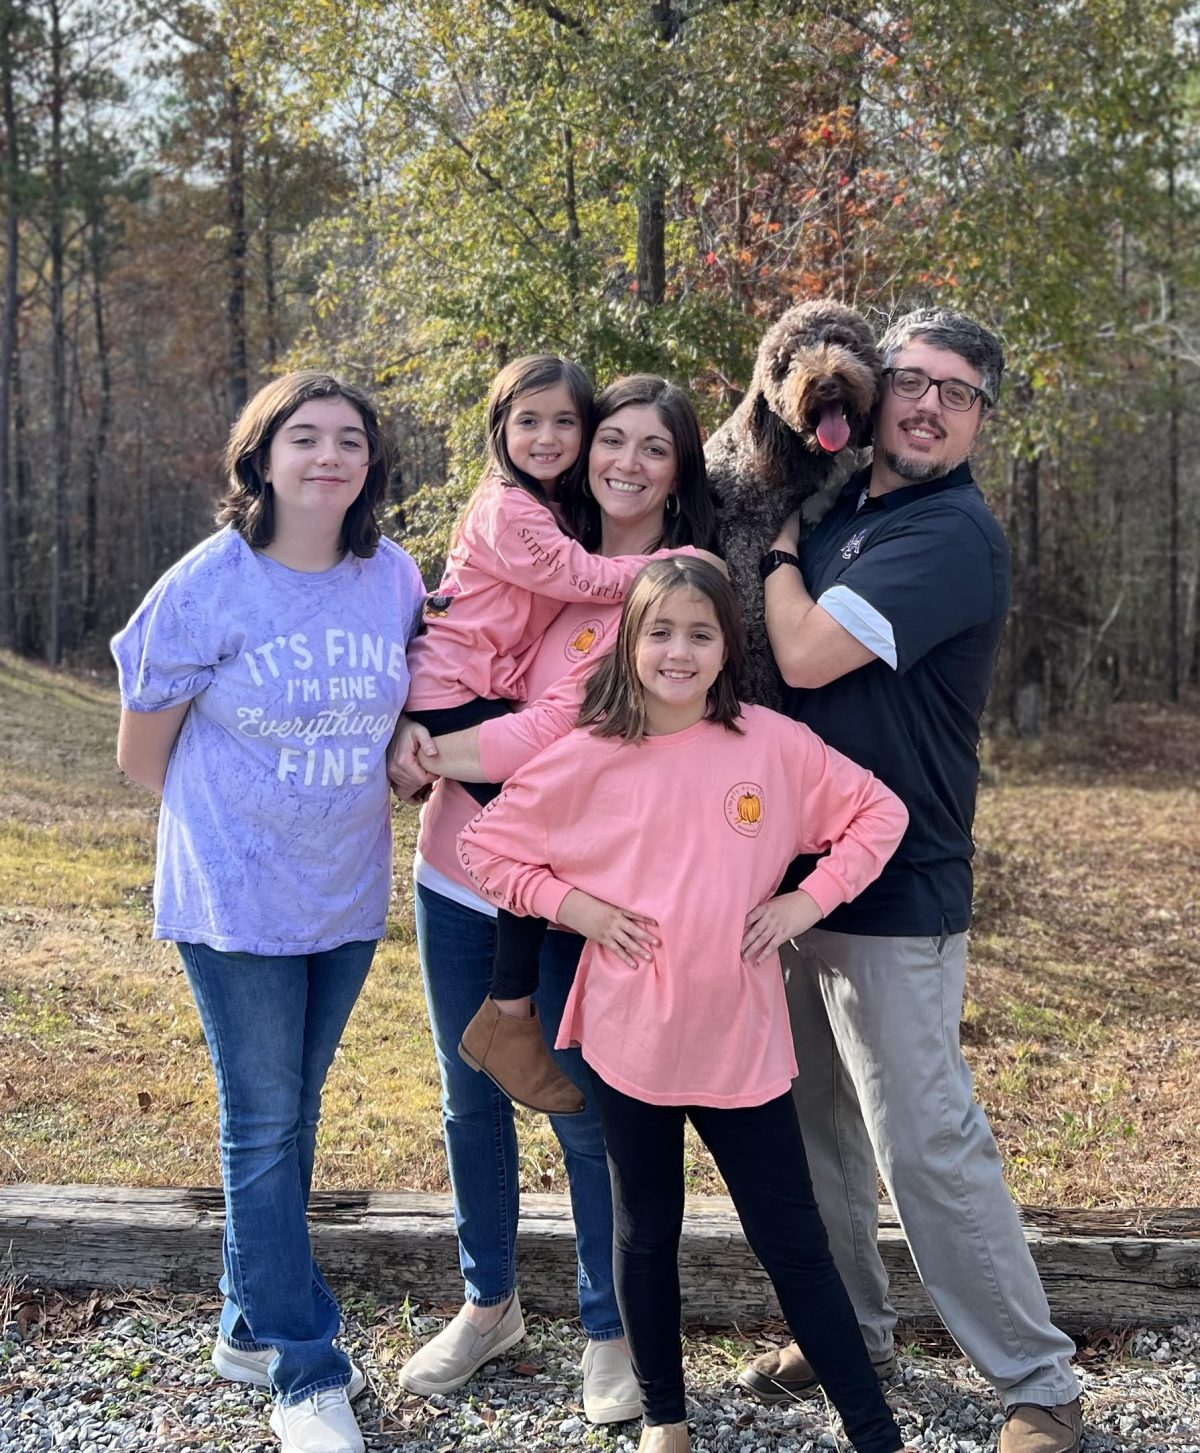 Brendan Chance poses for a family photo with his wife Jenny have three daughters, Katie Brooke, Lane, and Abby.